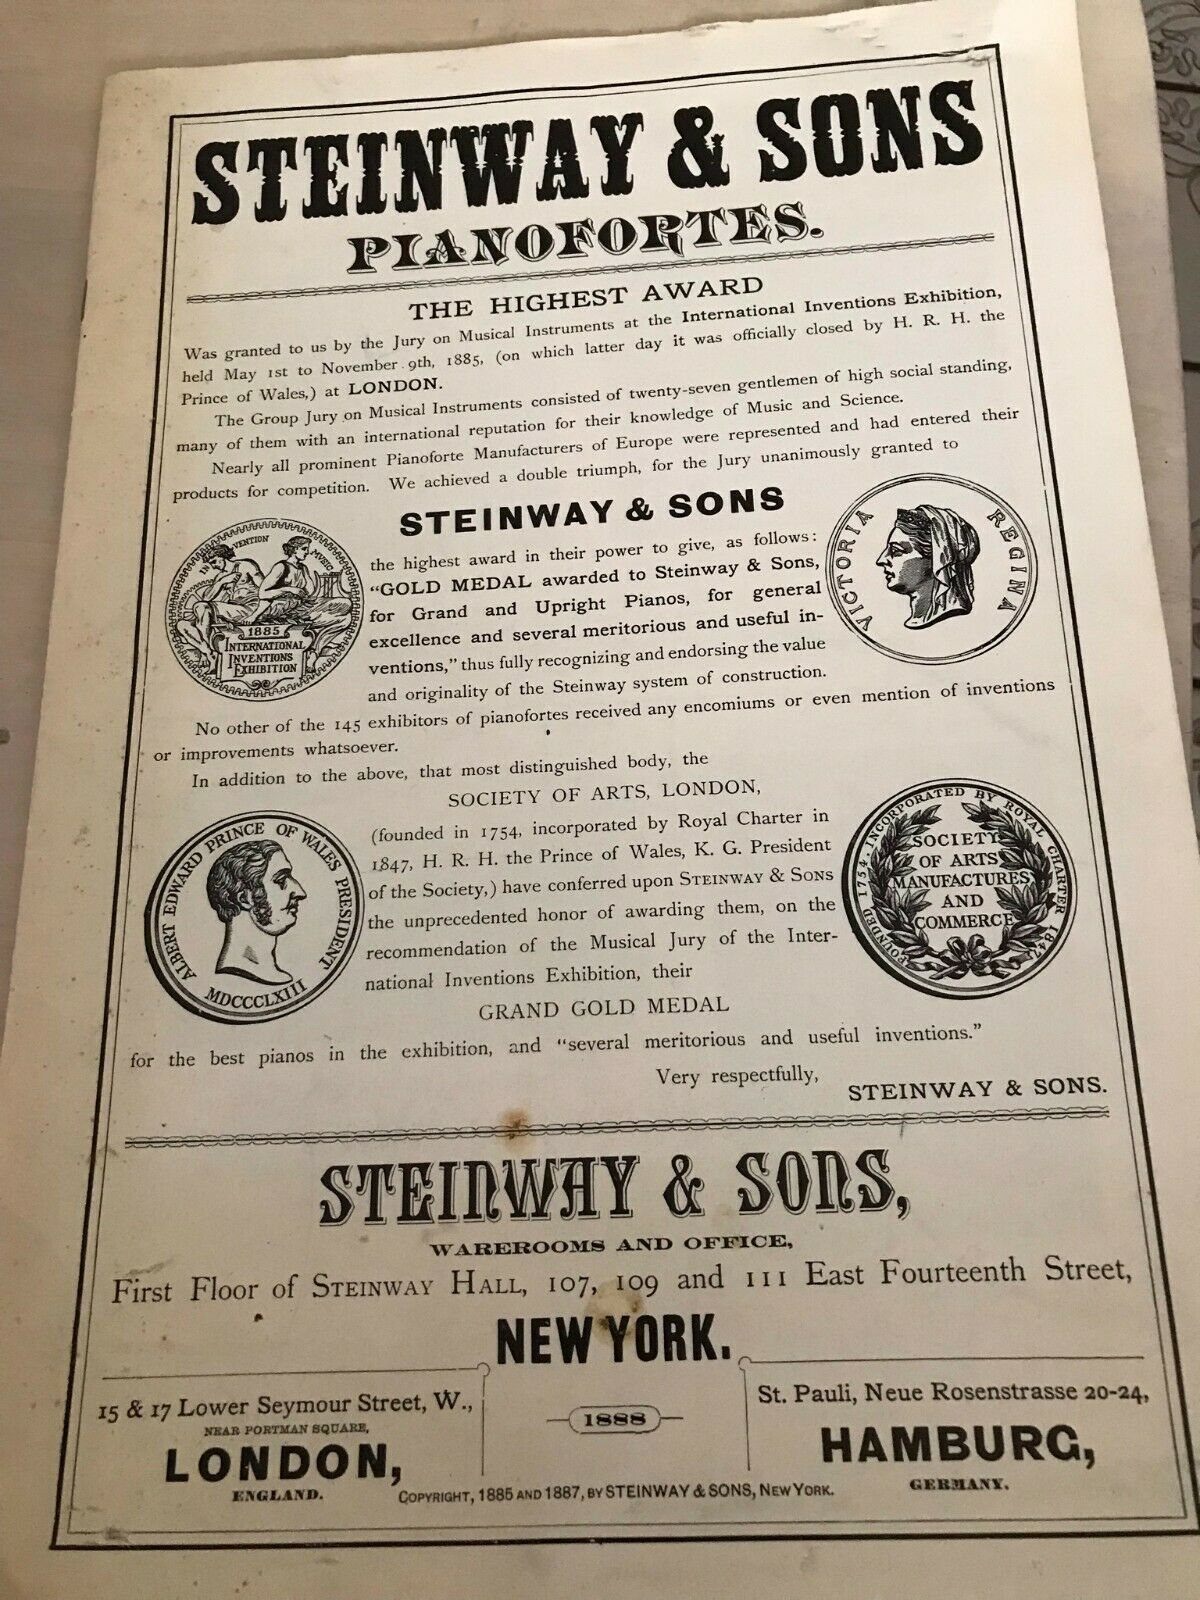 Steinway & Sons Pianofortes - Large Booklet (9 Pages)